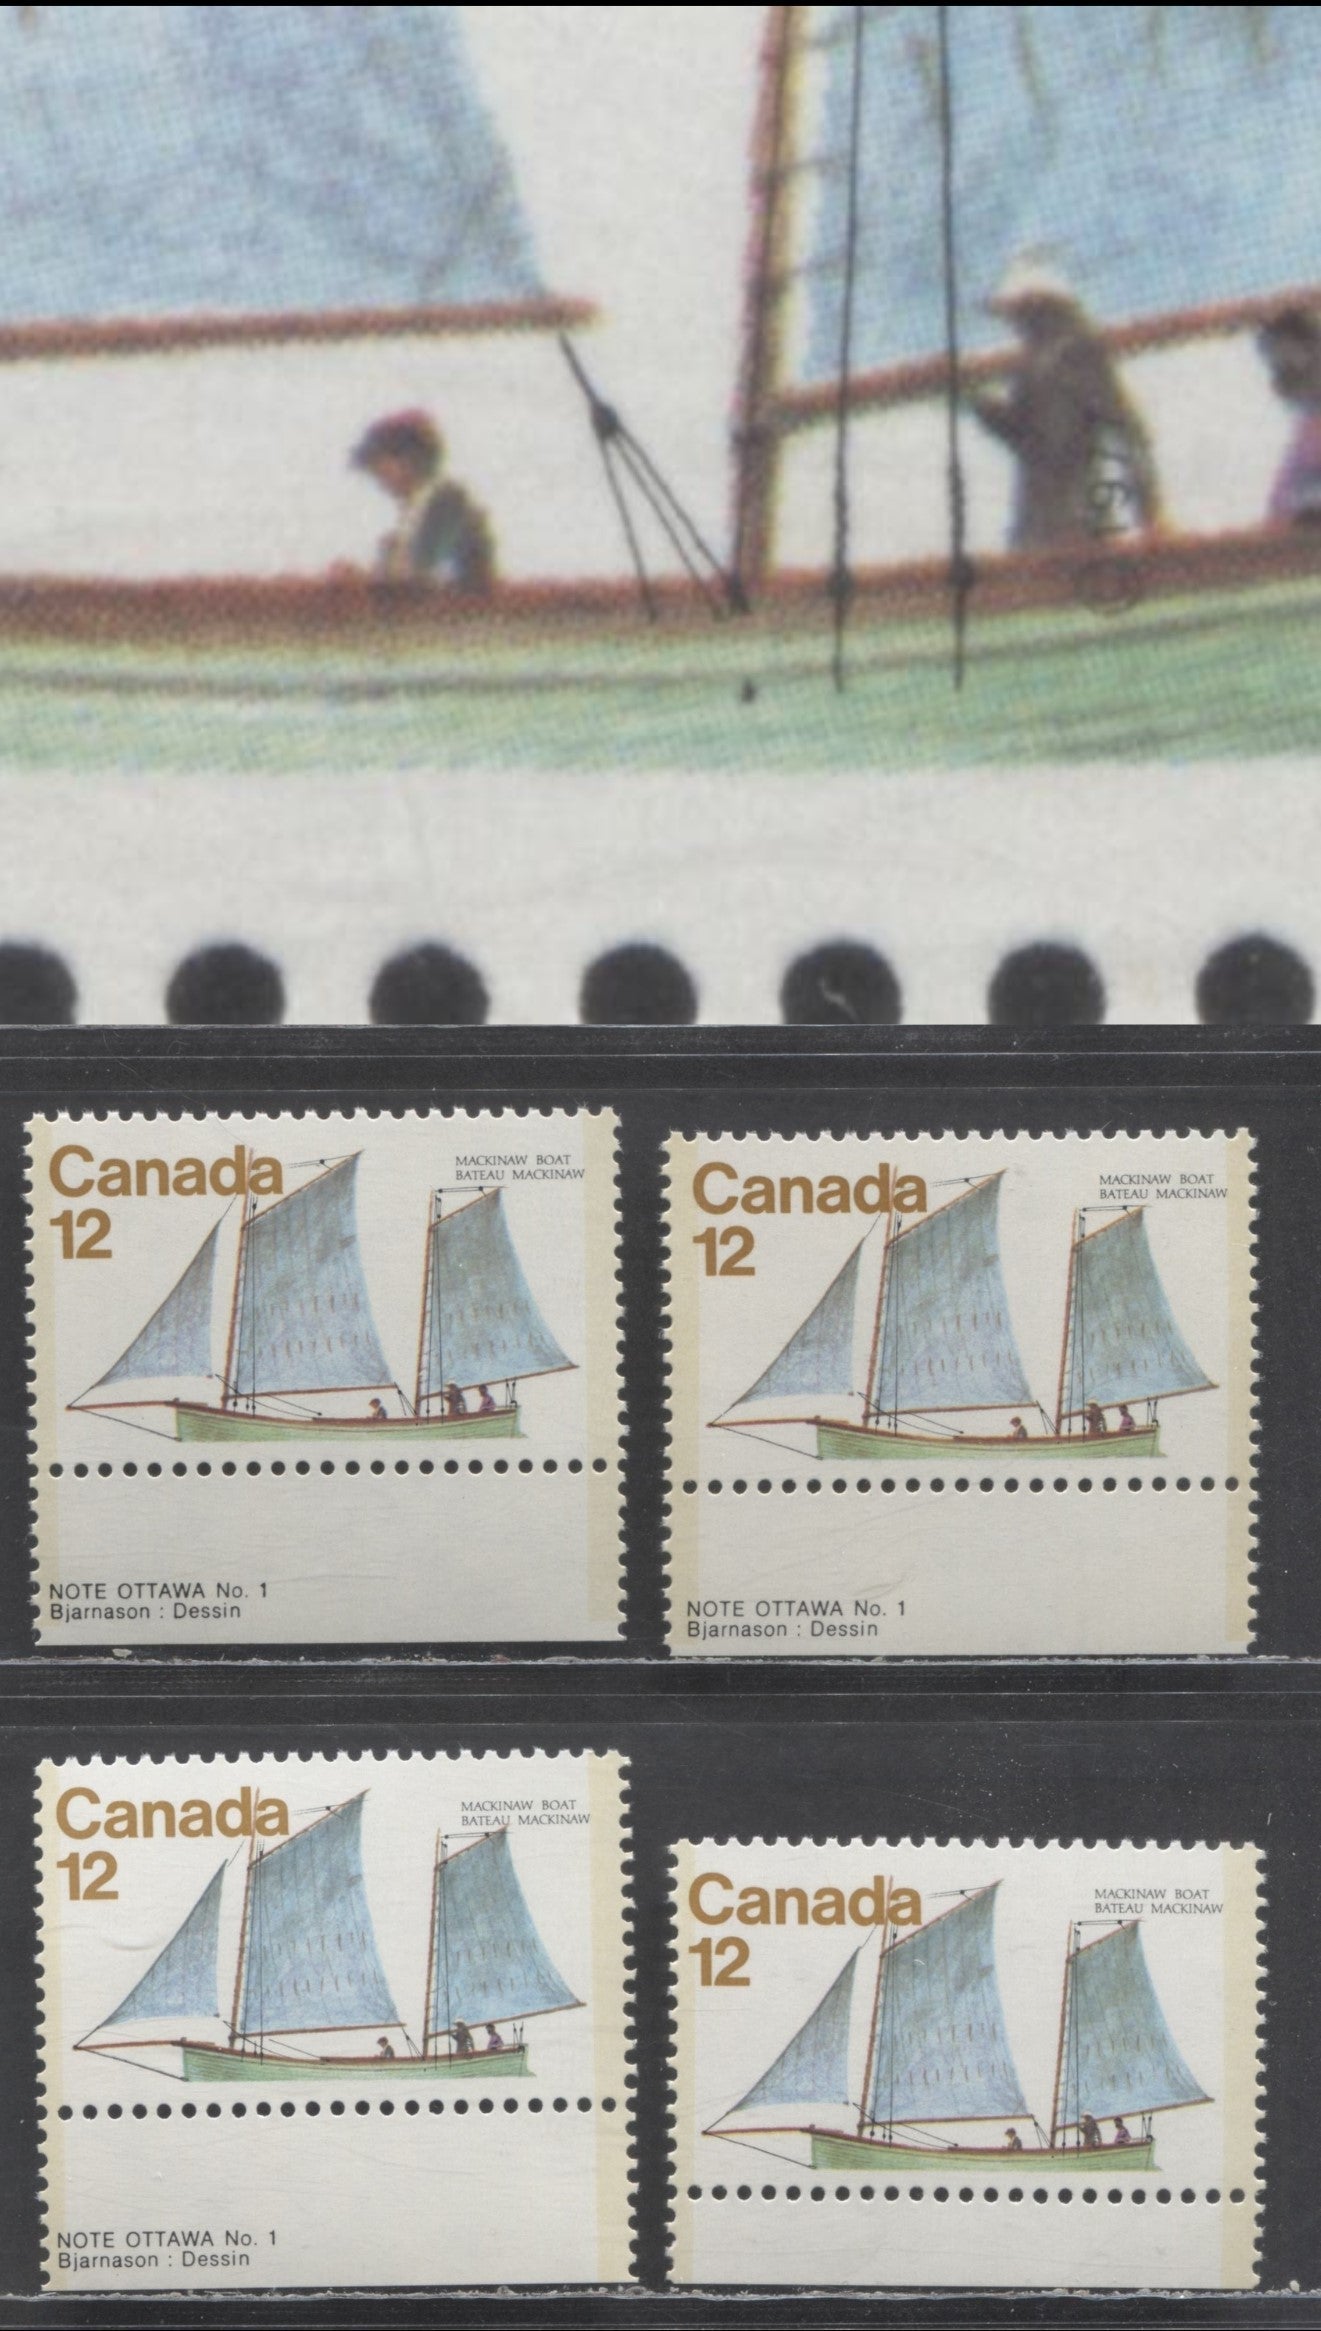 Lot 464 Canada #747i 12c Multicolored Mackinaw Boat, 1977 Sailing Vessels Issue, 4 VFNH Singles Showing 3 Pulleys From Pos. 47 On DF/LF, DF/DF & DF/NH Papers